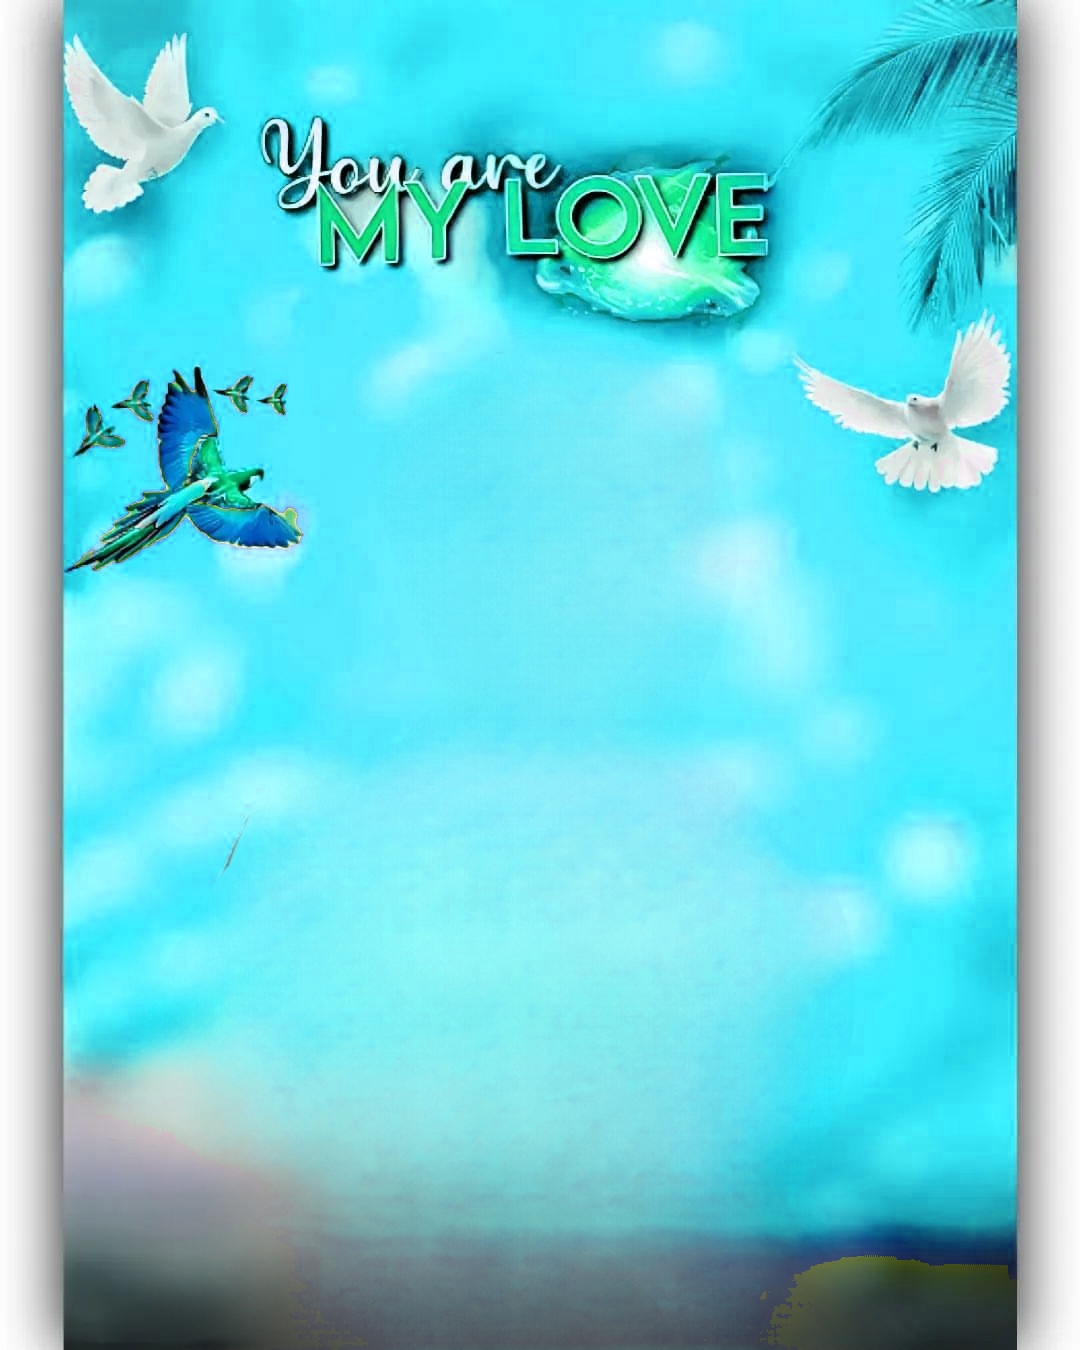 Sky Blue colour cb Editing backgrounds with my love text